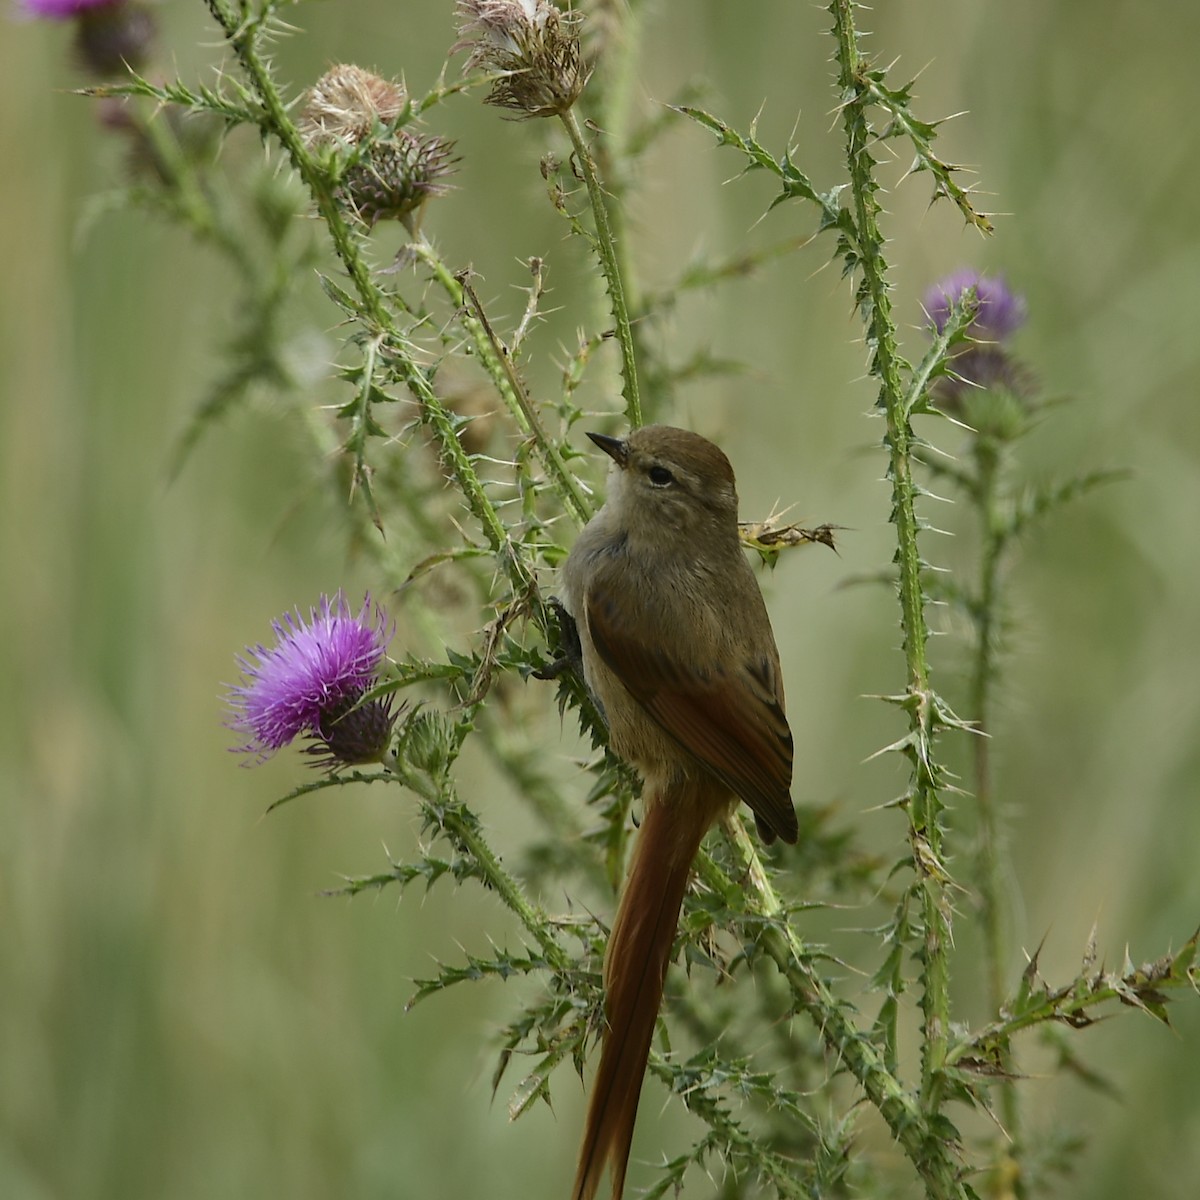 Brown-capped Tit-Spinetail - Eugenia Boggiano